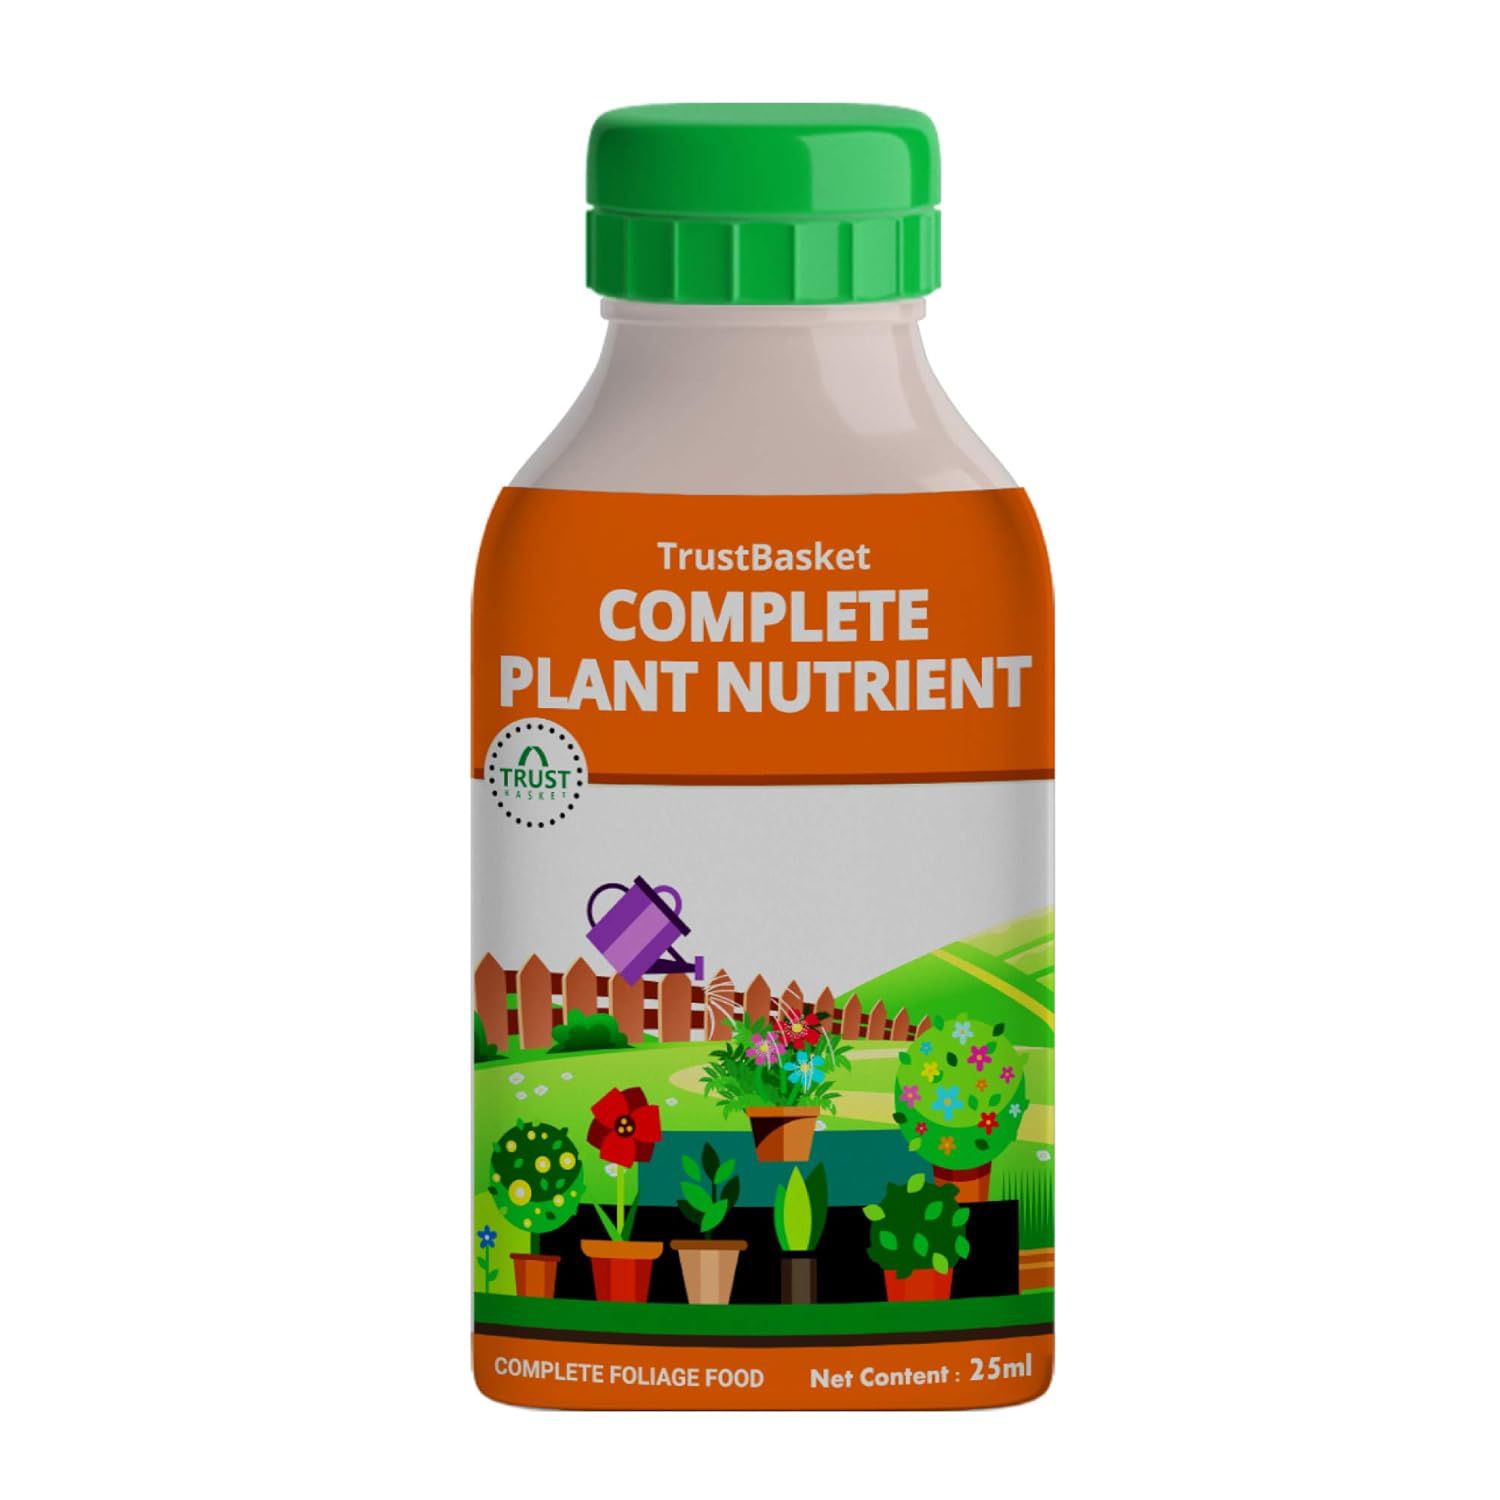     			TrustBasket Concentrated All Purpose Organic Plant Nutrient Feeds 100 Plants Upto 3 Months